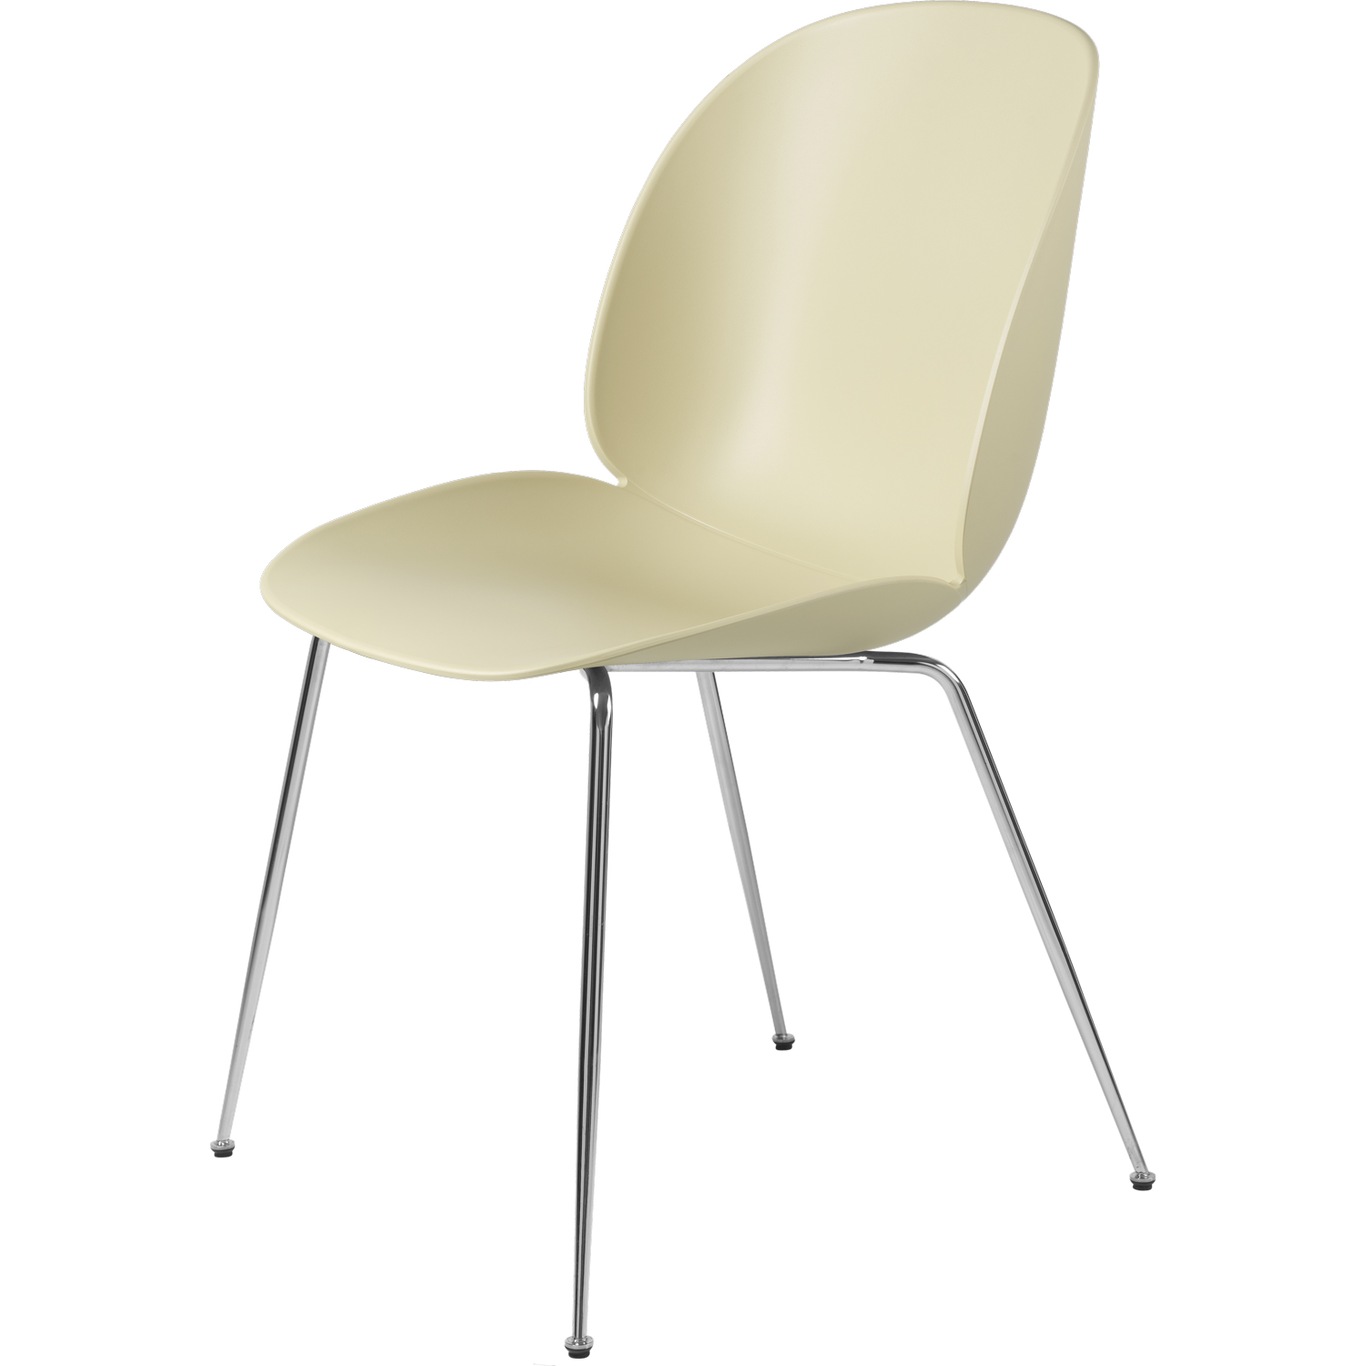 Beetle Chair Un-upholstered Conic Base Chrome, Pastel Green